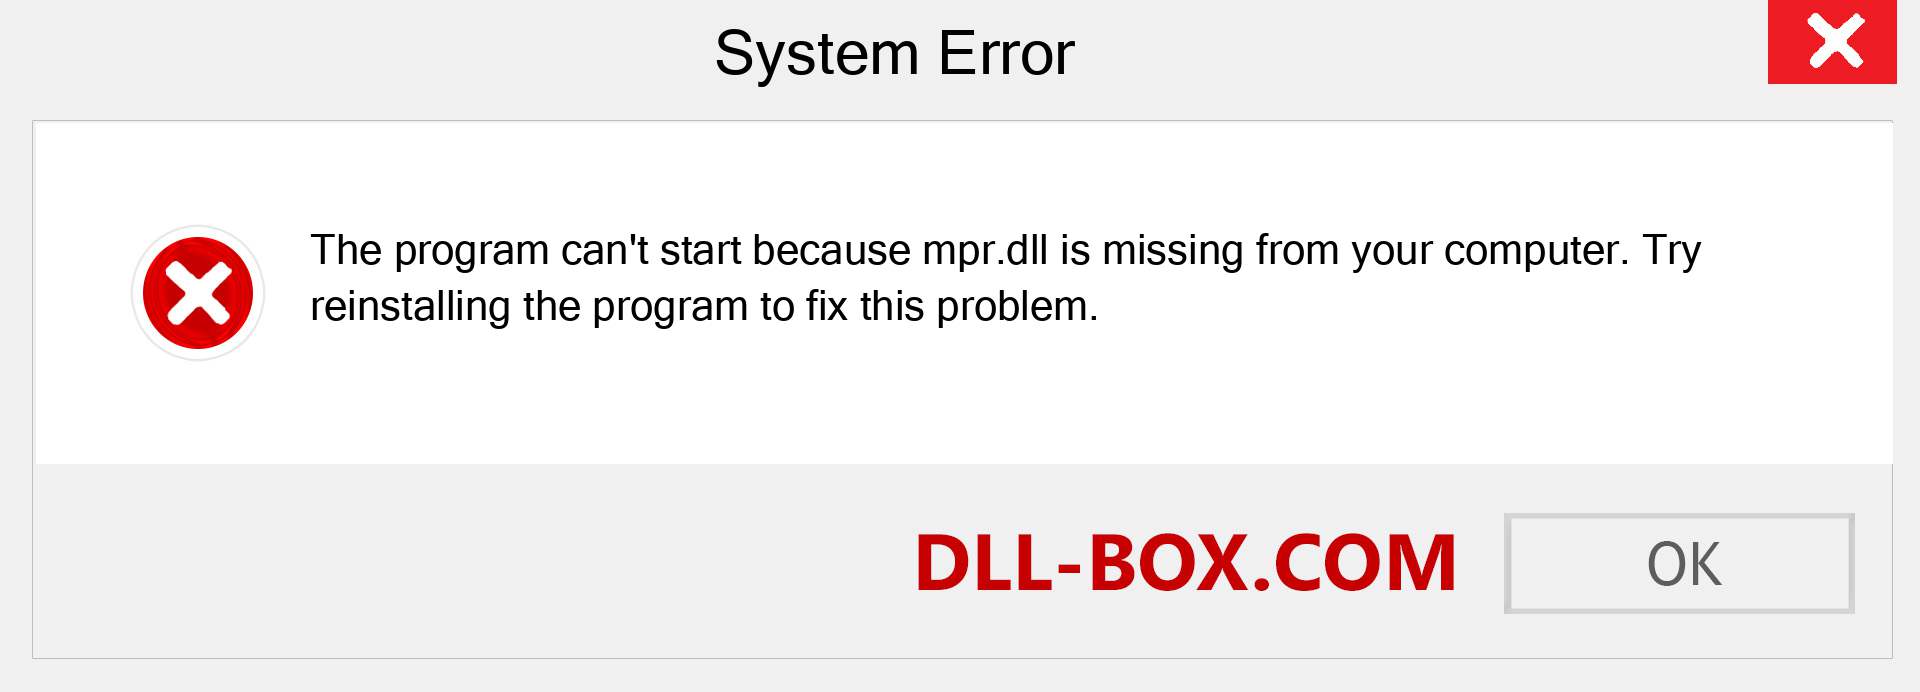  mpr.dll file is missing?. Download for Windows 7, 8, 10 - Fix  mpr dll Missing Error on Windows, photos, images